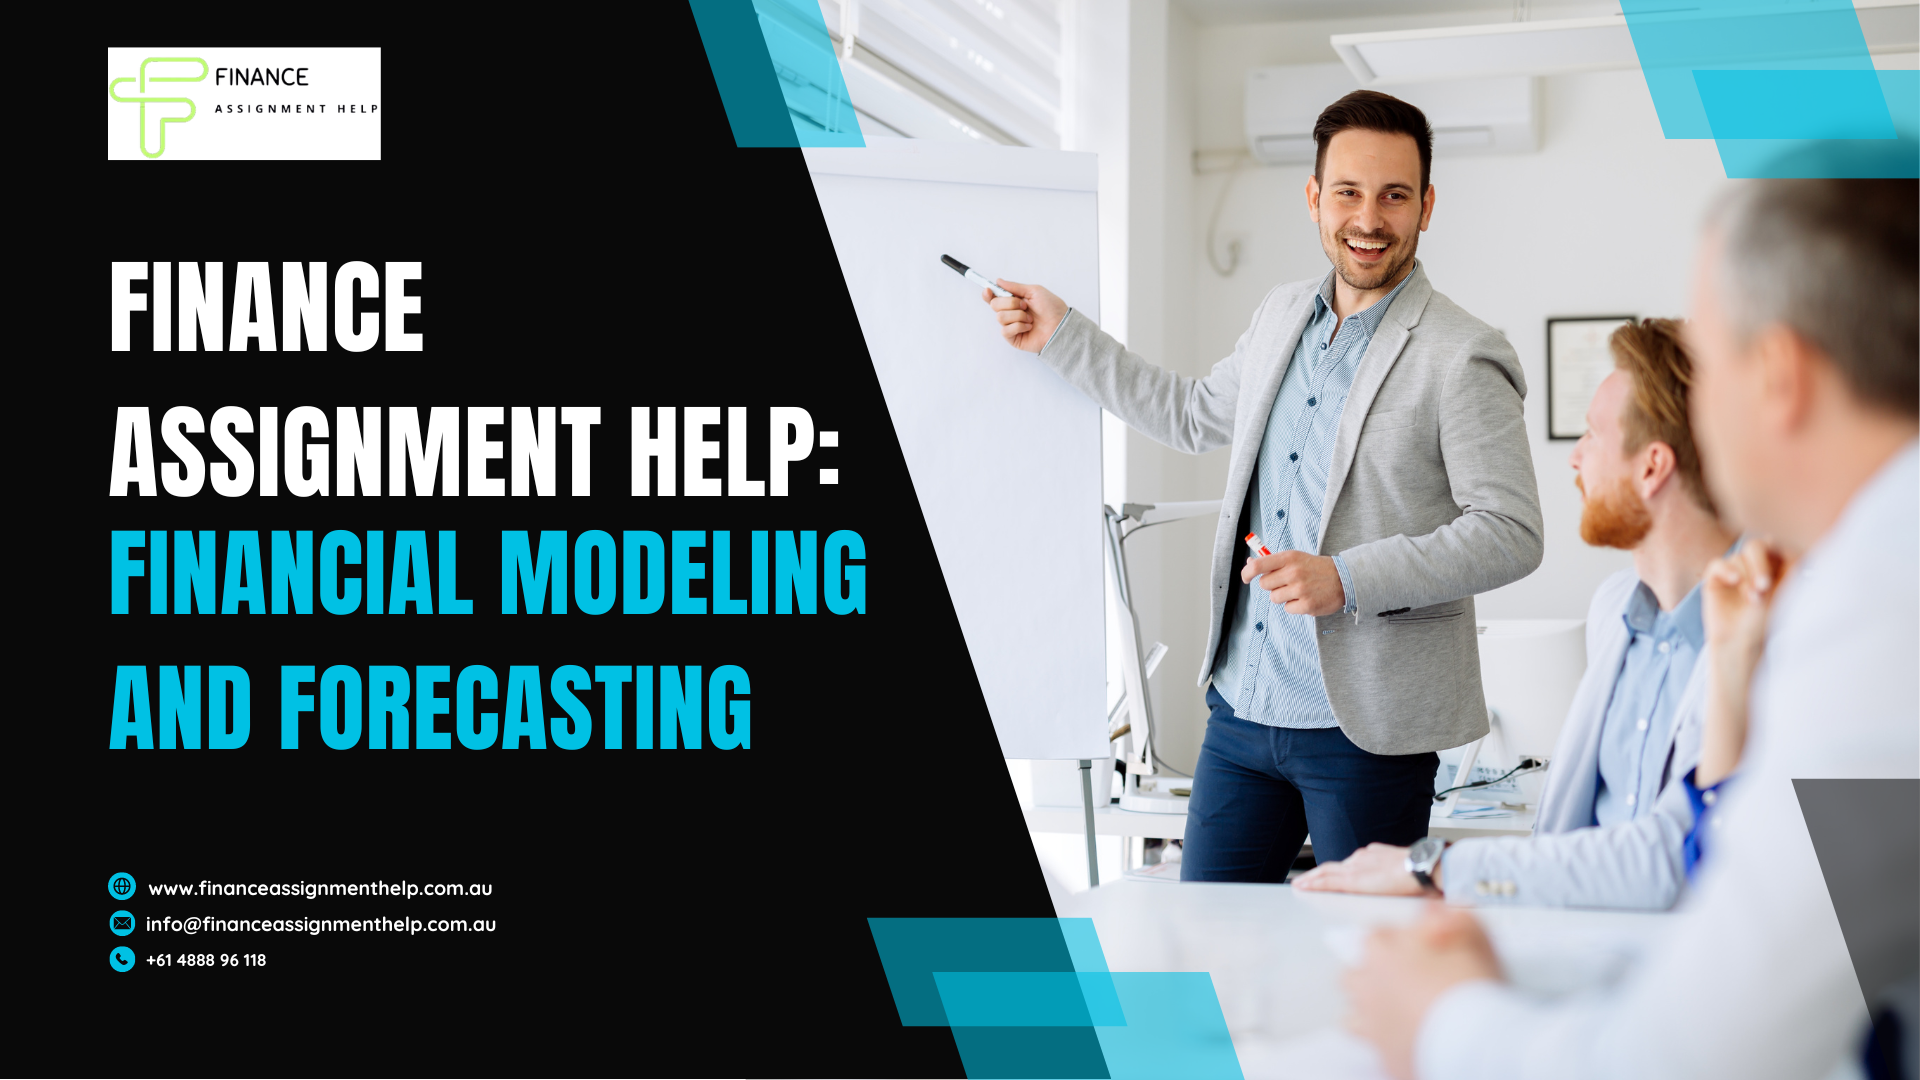 Finance Assignment Help: Financial Modeling and Forecasting